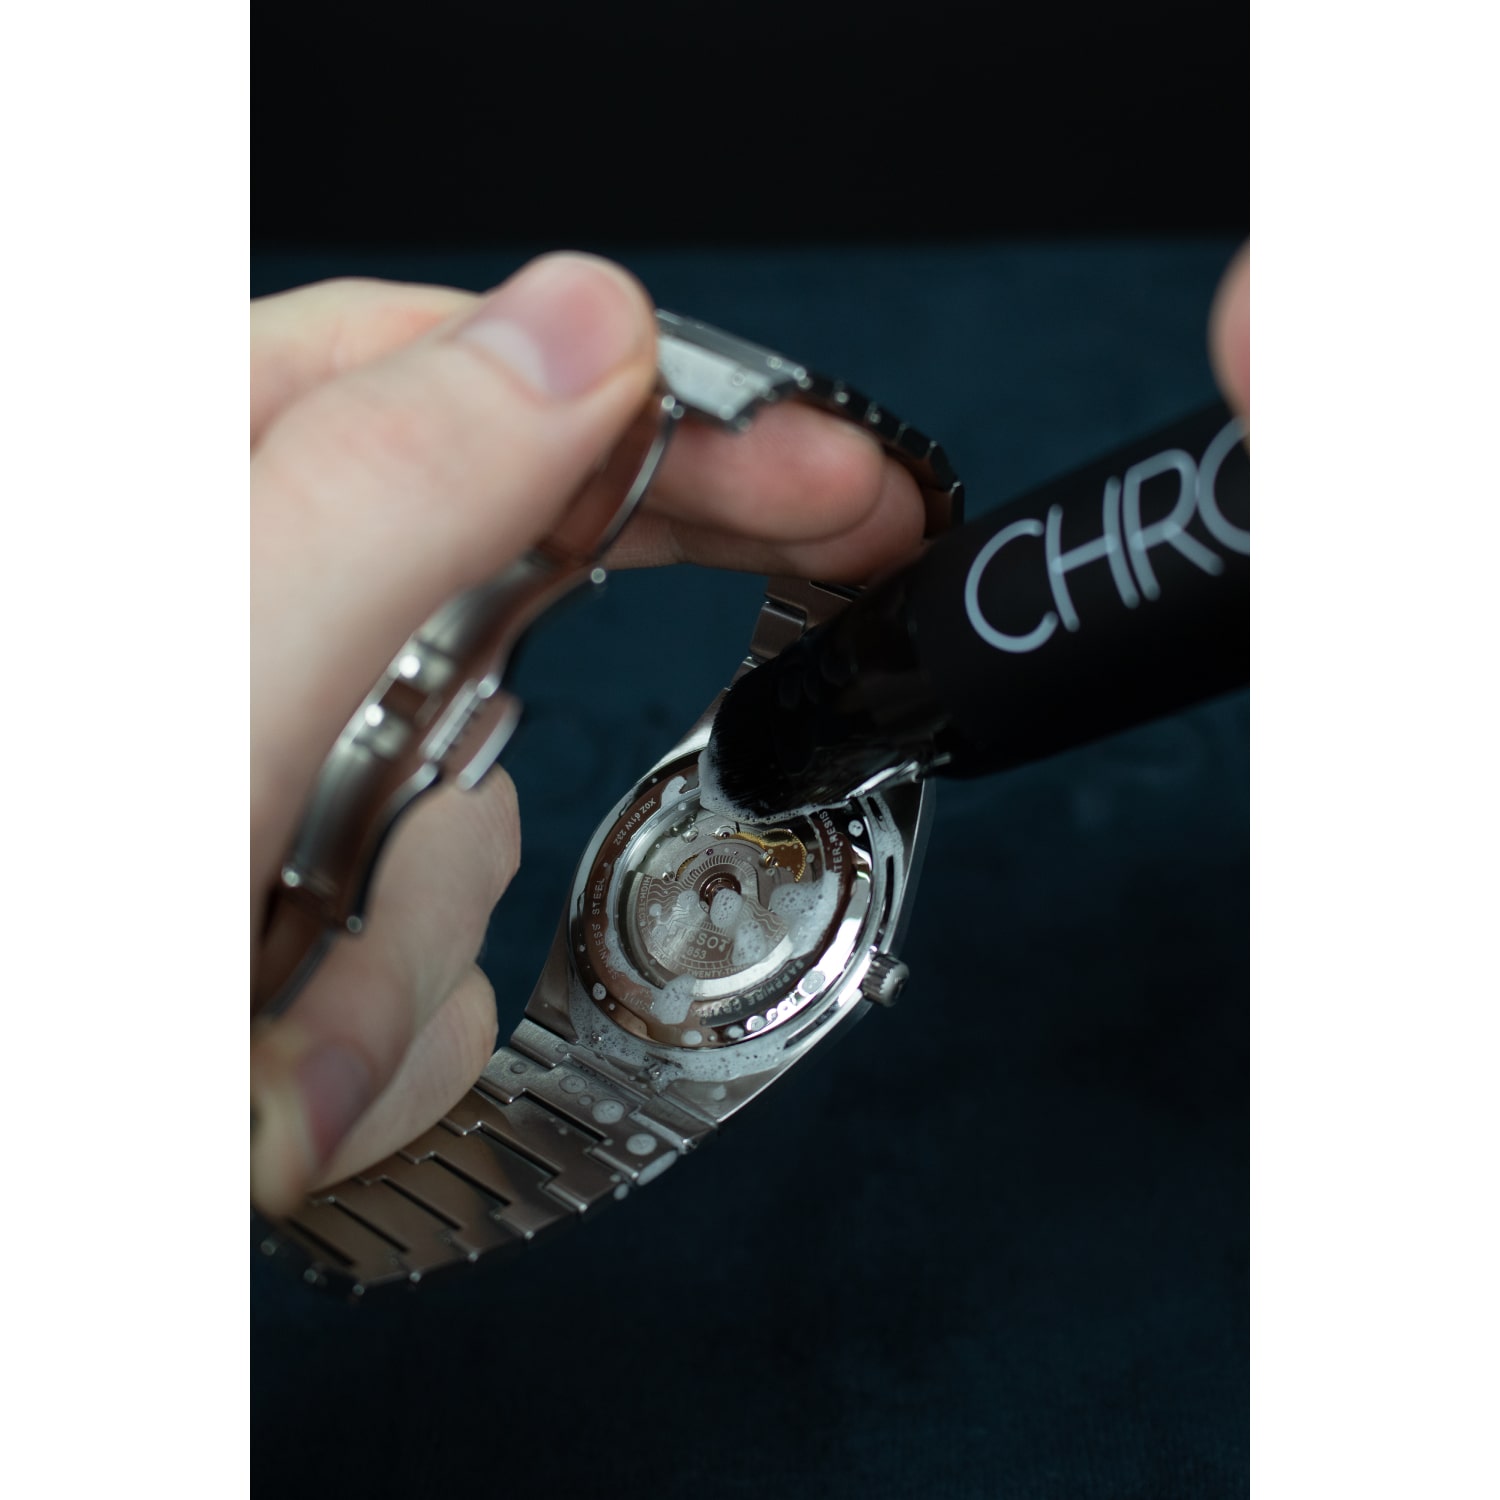 CHRONOPEN - THE WATCH CLEANER at Selva Online